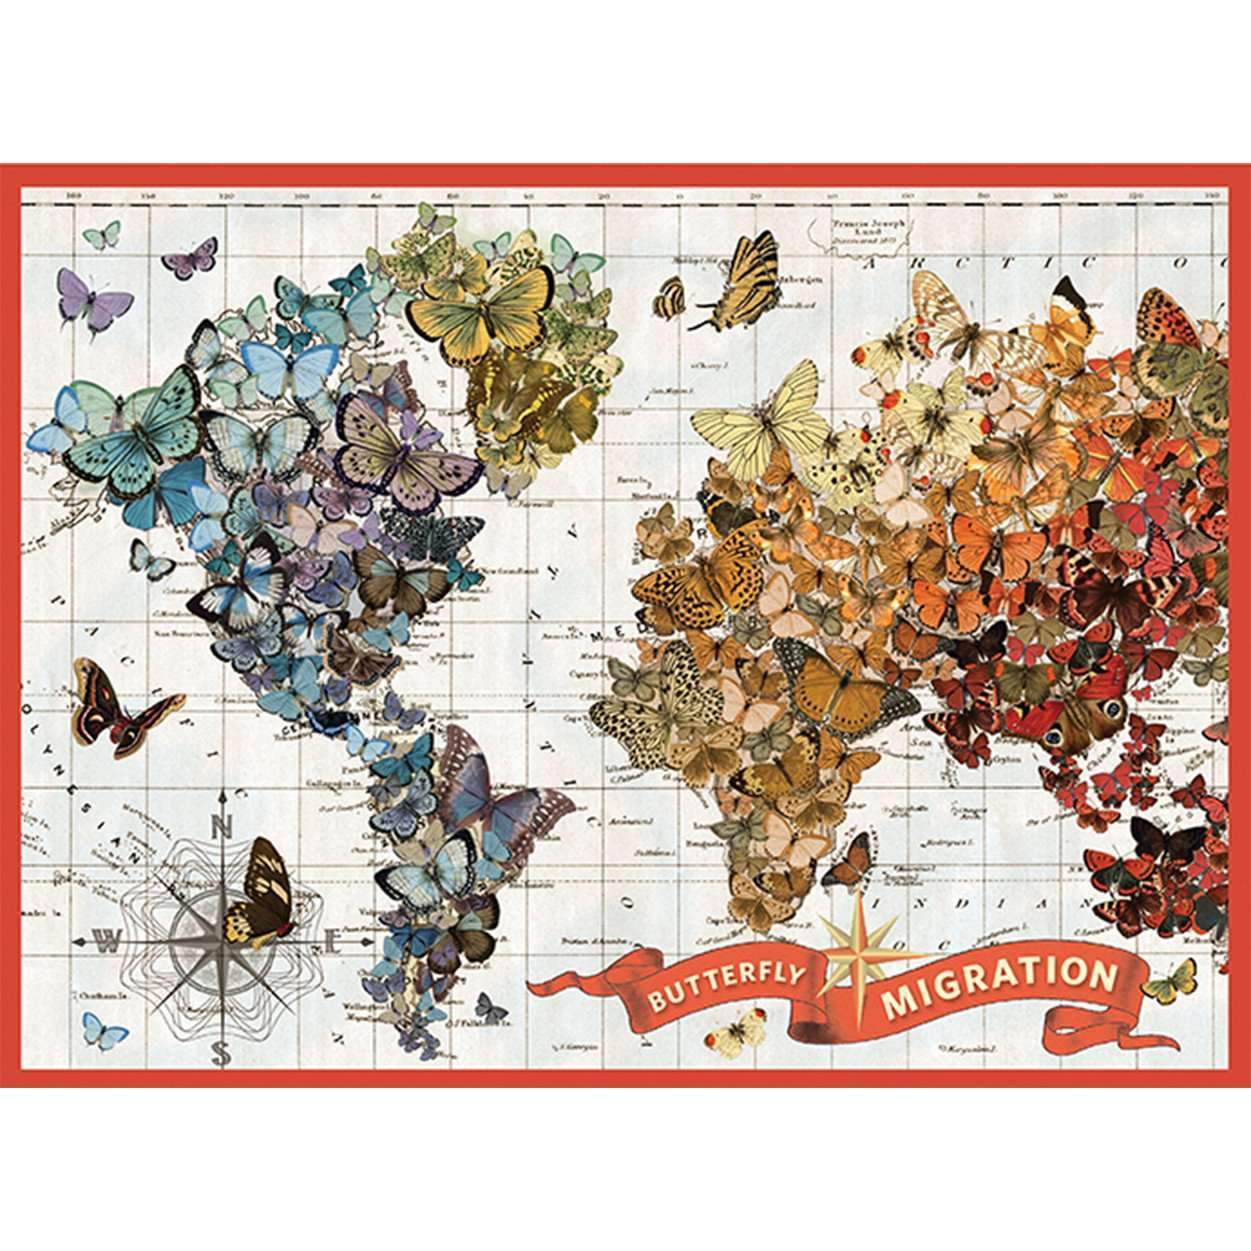 Wendy Gold Butterfly Migration | 1,000 Piece Jigsaw Puzzle